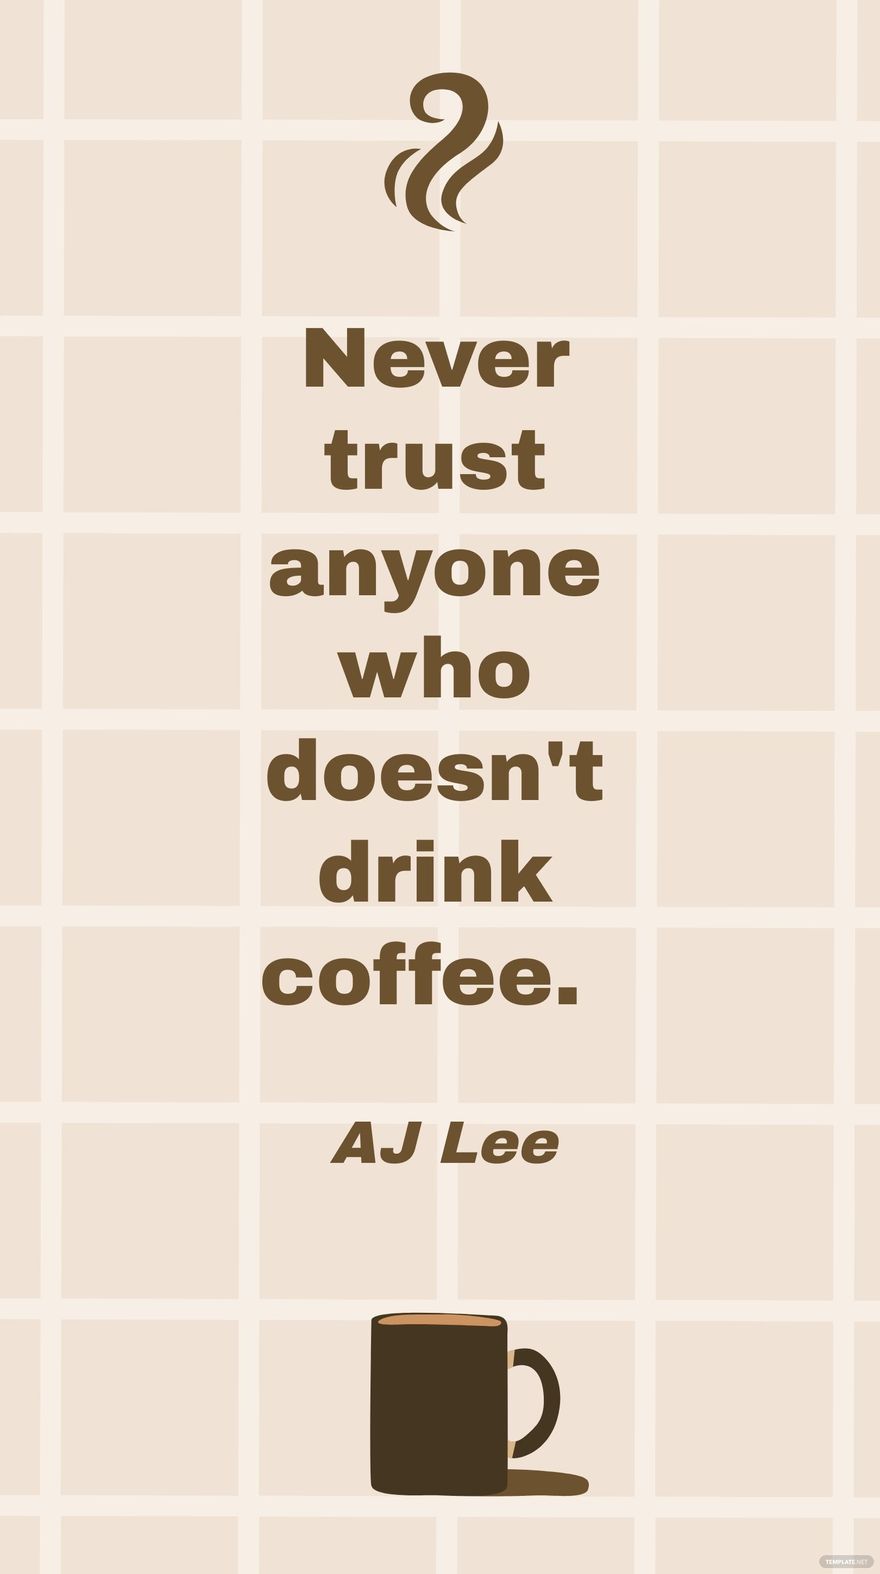 AJ Lee - Never trust anyone who doesn't drink coffee.